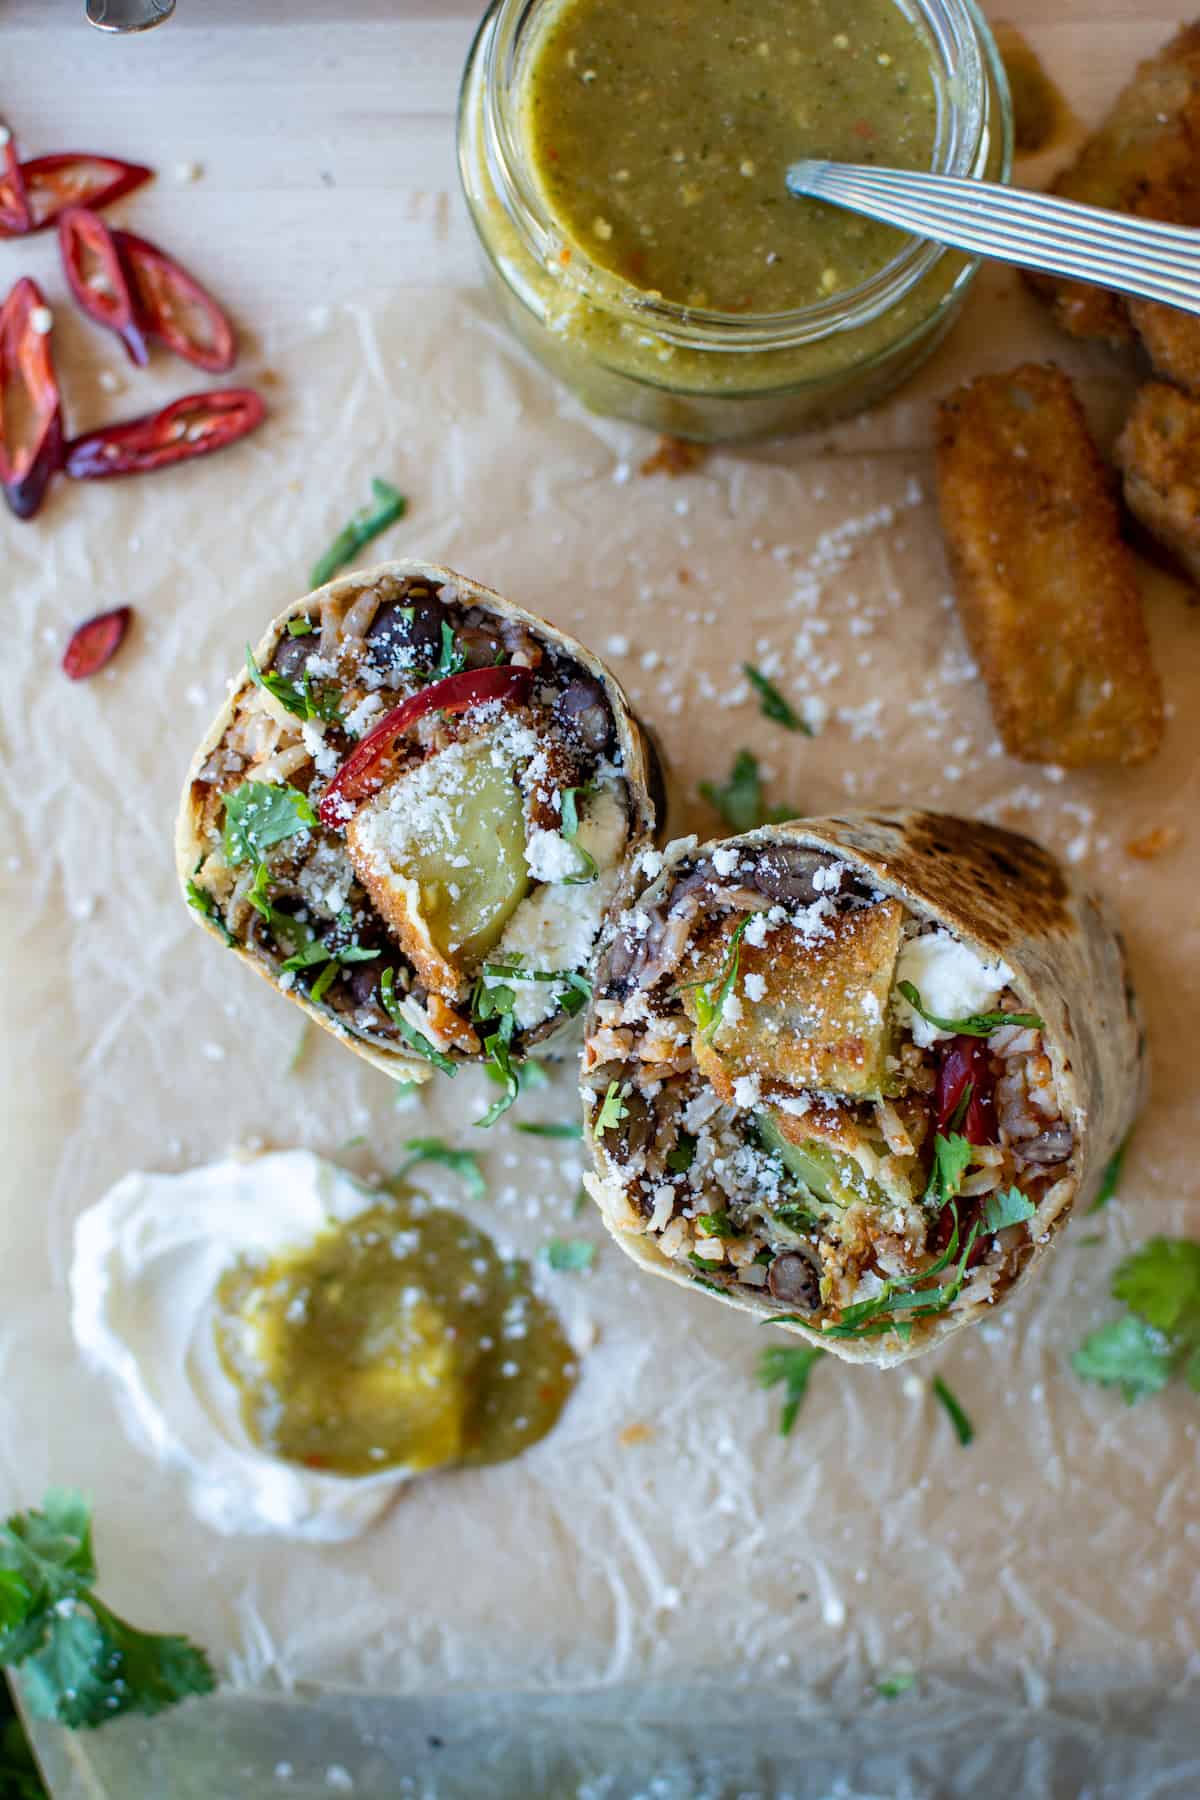 A green tomato burrito cut in half to show the filling on the inside with a jar of salsa on the side and some sliced chiles.